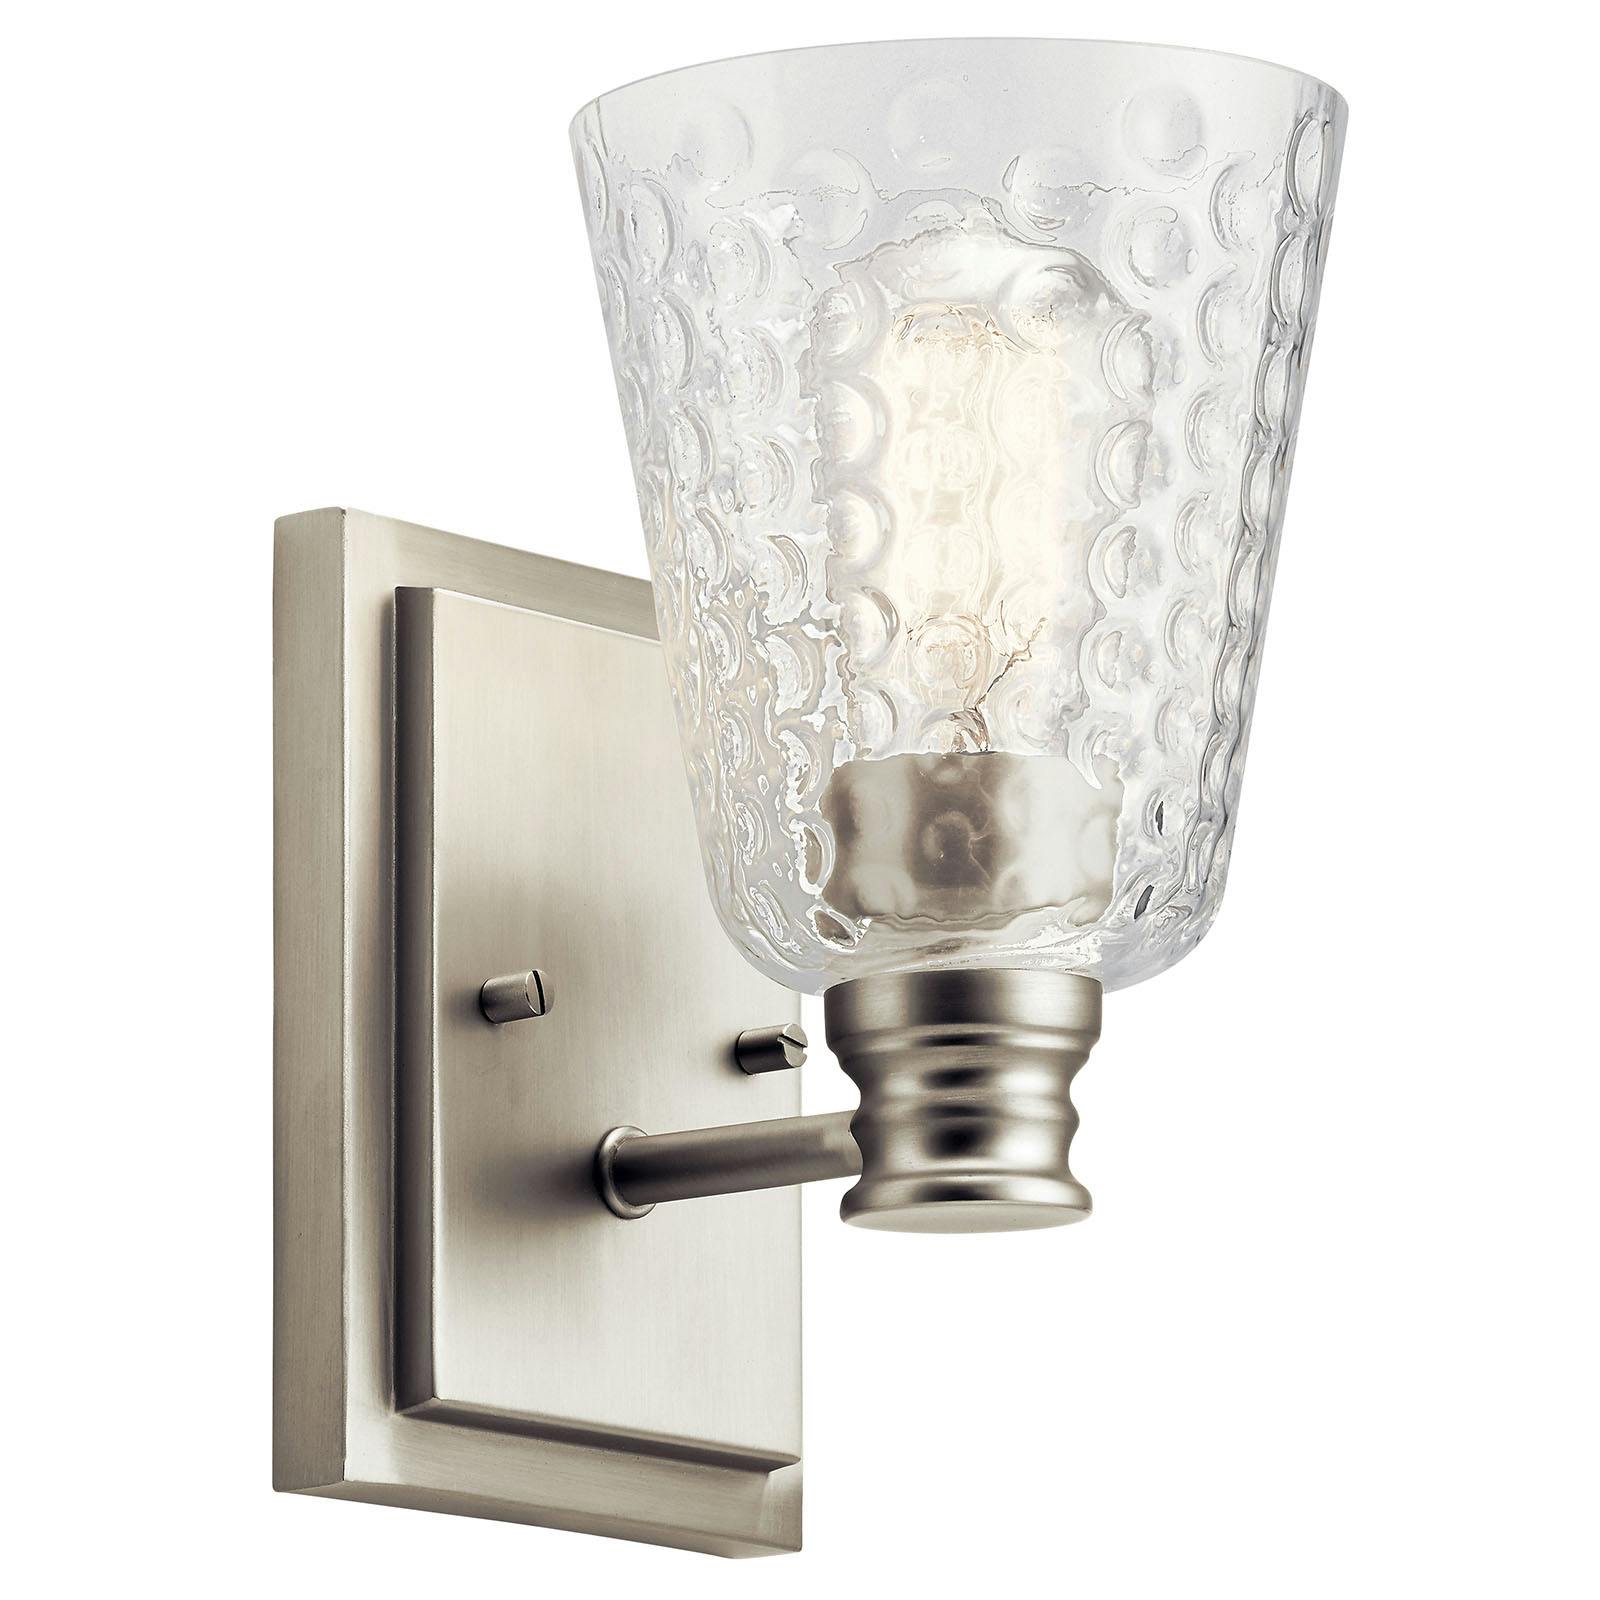 Nadine 1 Light Wall Sconce Brushed Nickel on a white background